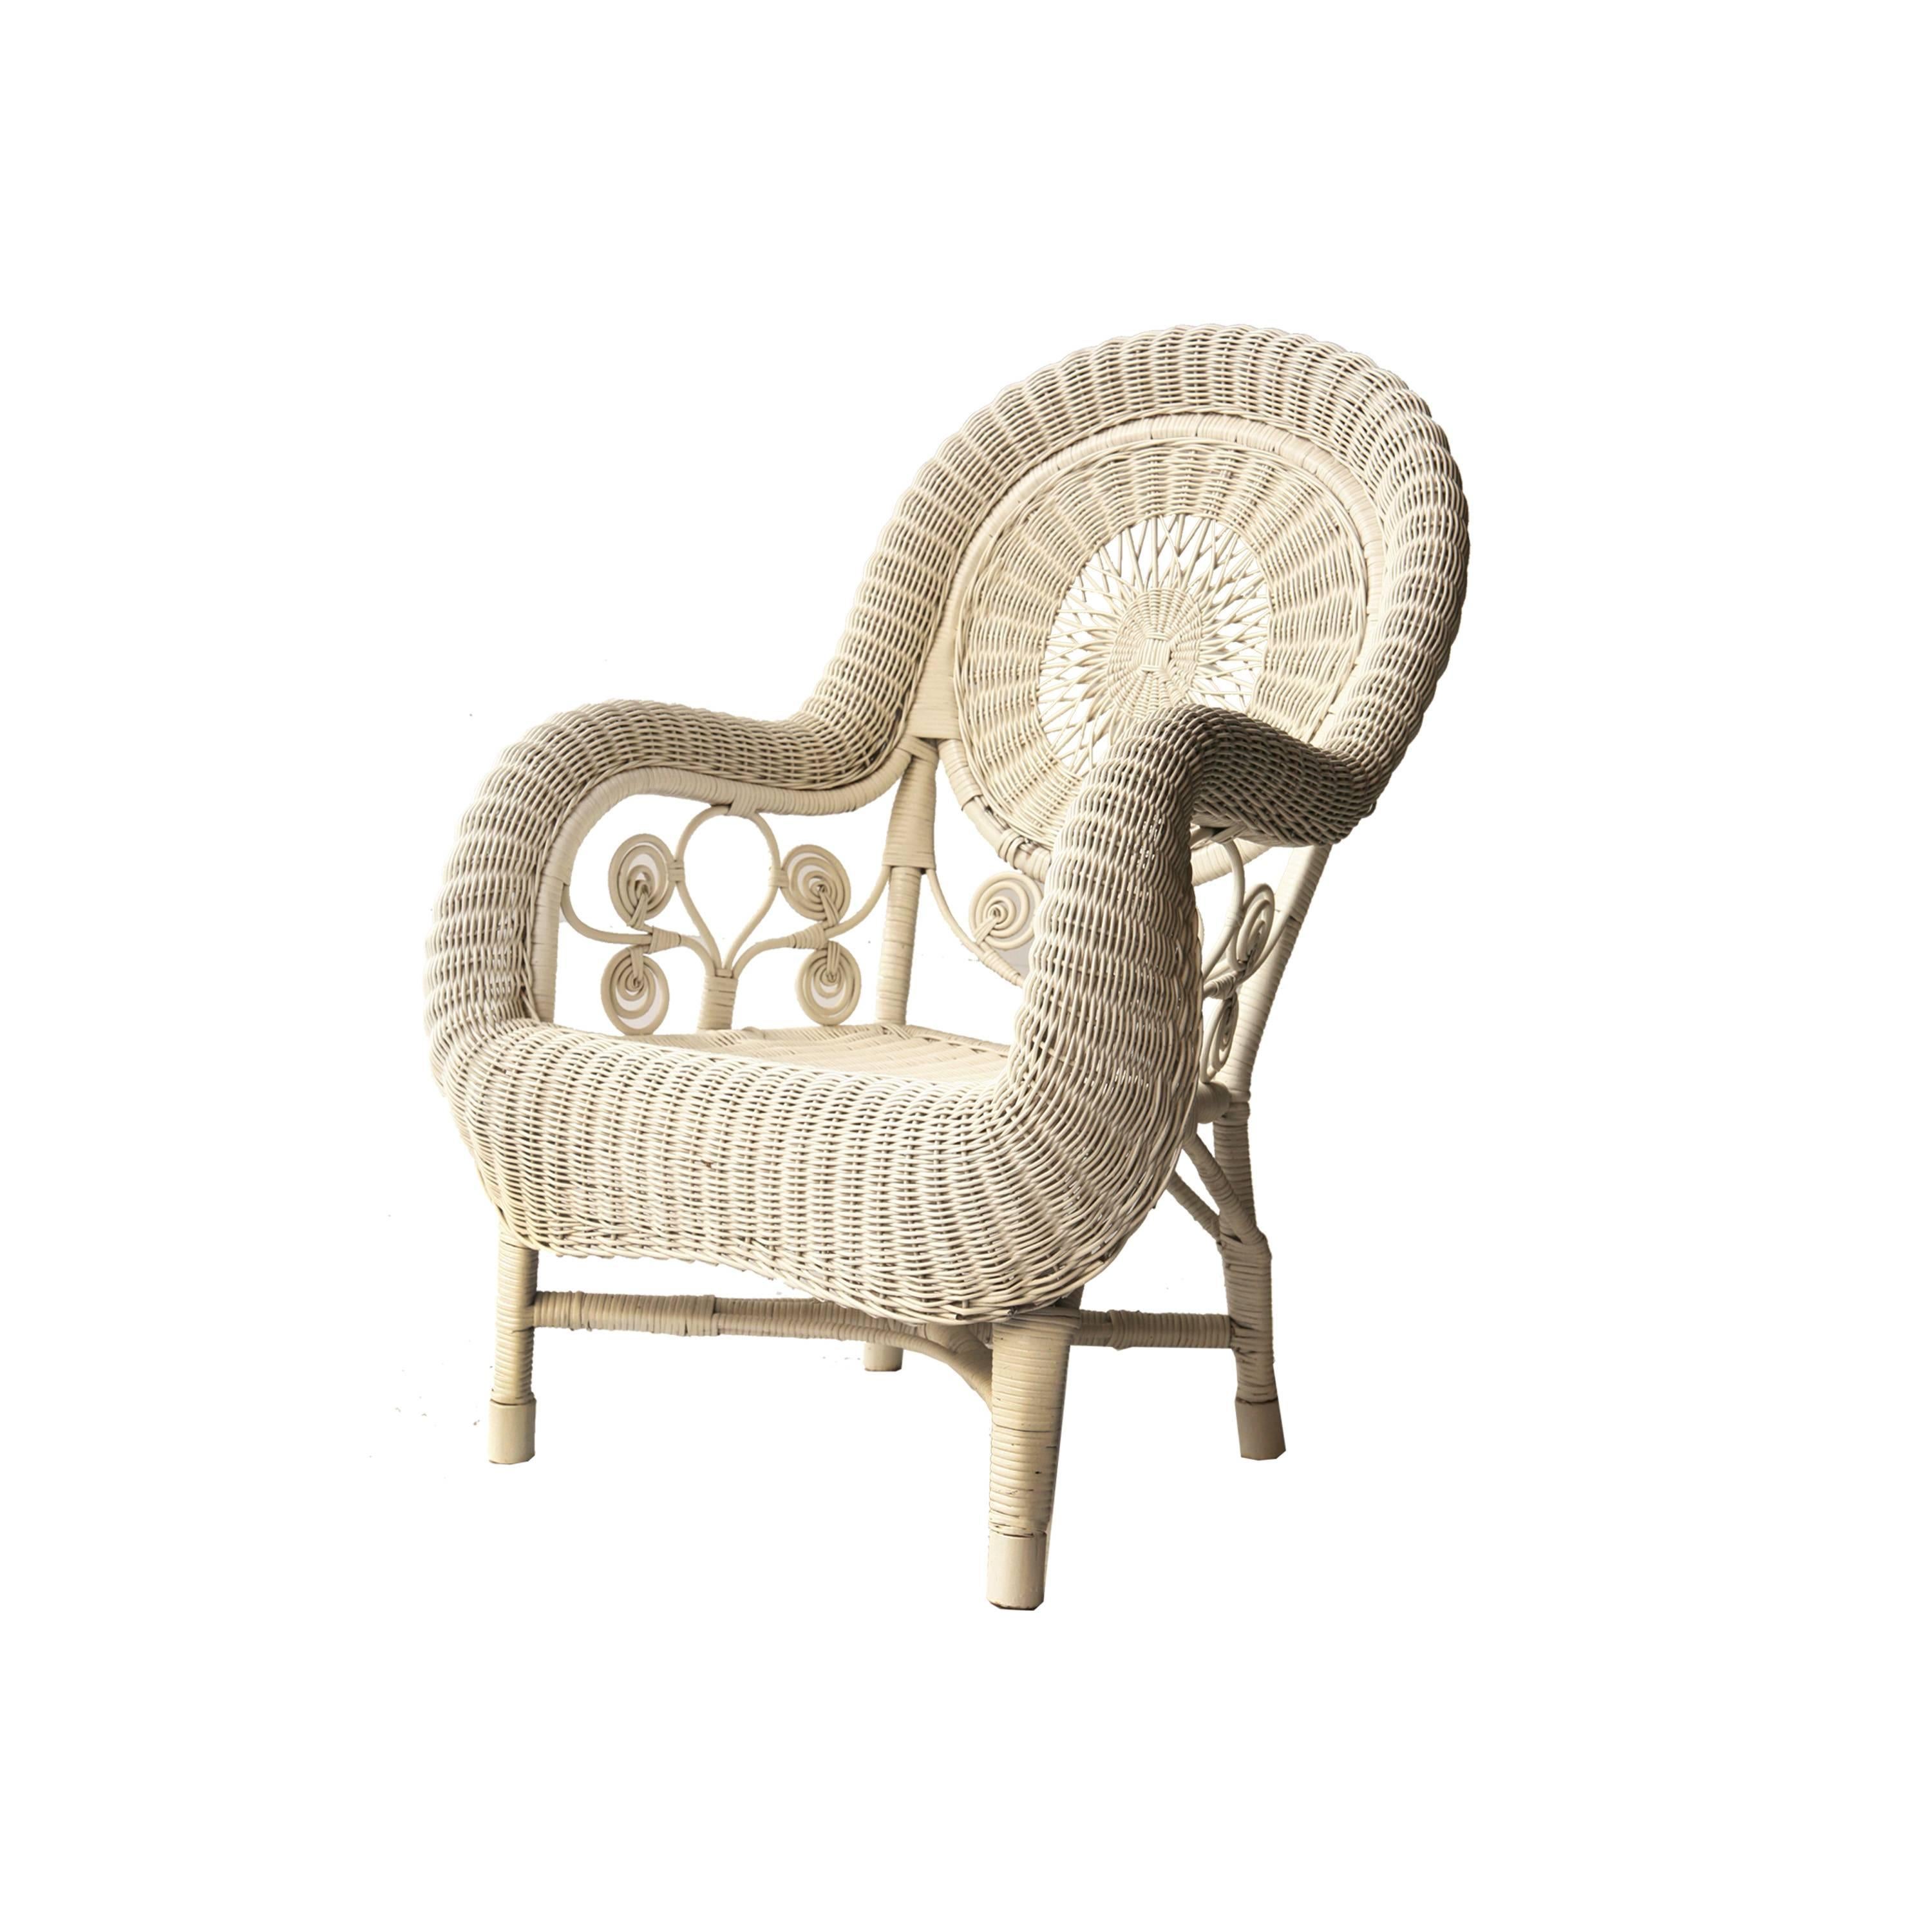 Pair of armchairs craft made in natural fiber structure painted in white.